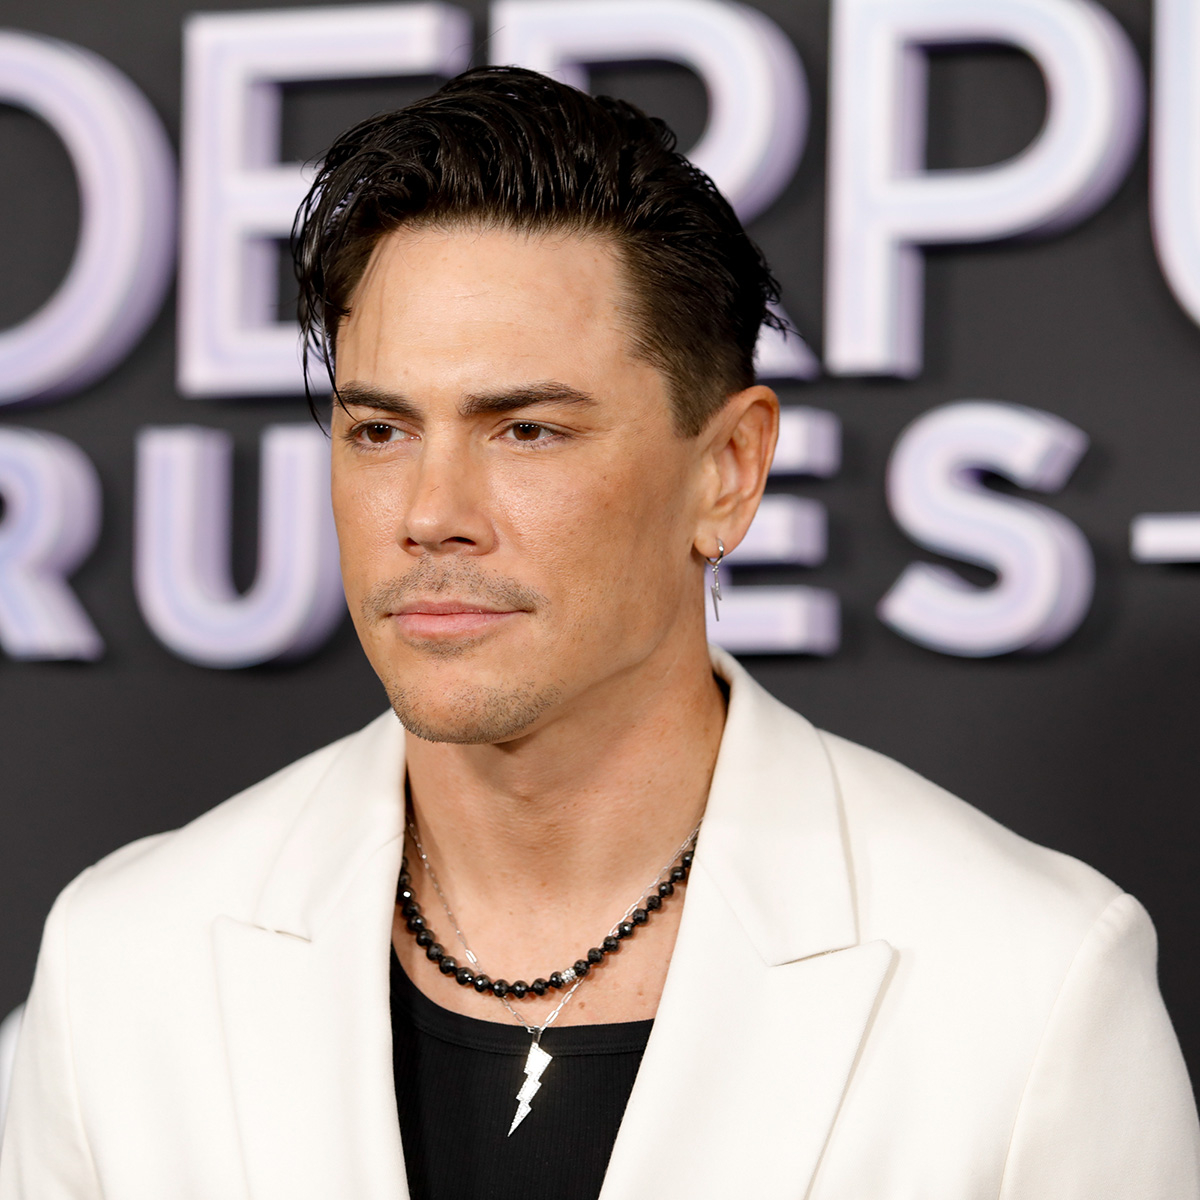 Tom Sandoval Compares Vanderpump Rules Cheating Scandal to O.J. Simpson and George Floyd